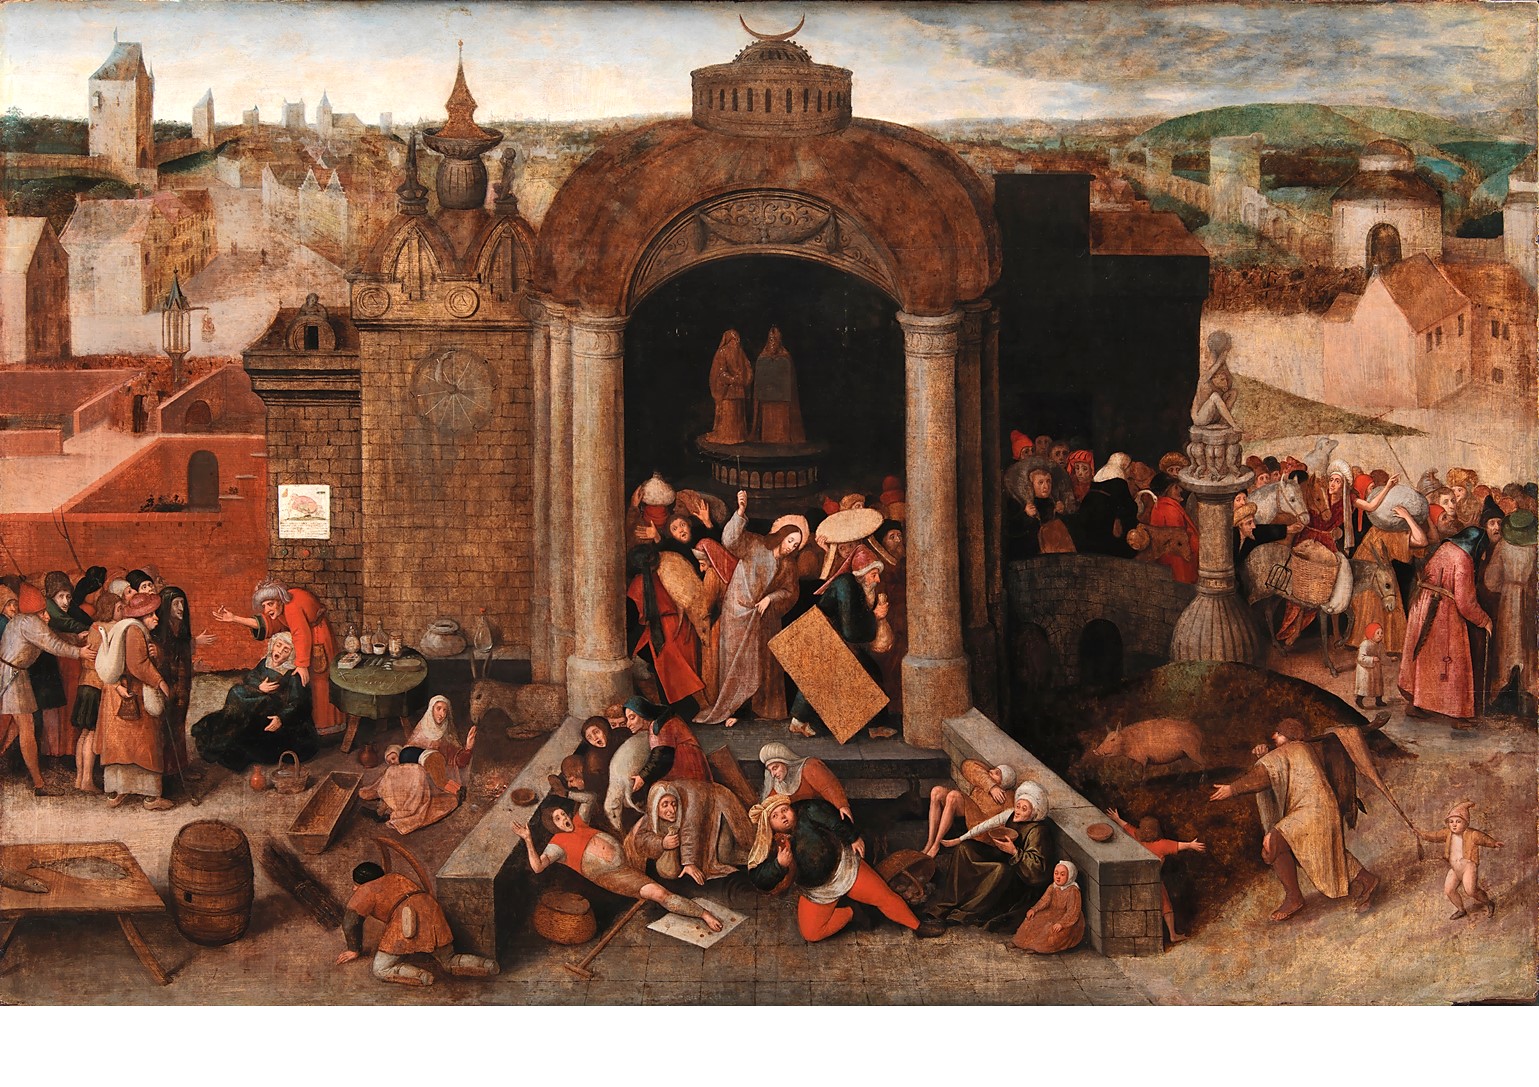 Christ Driving the Traders from the Temple by Pieter Bruegel